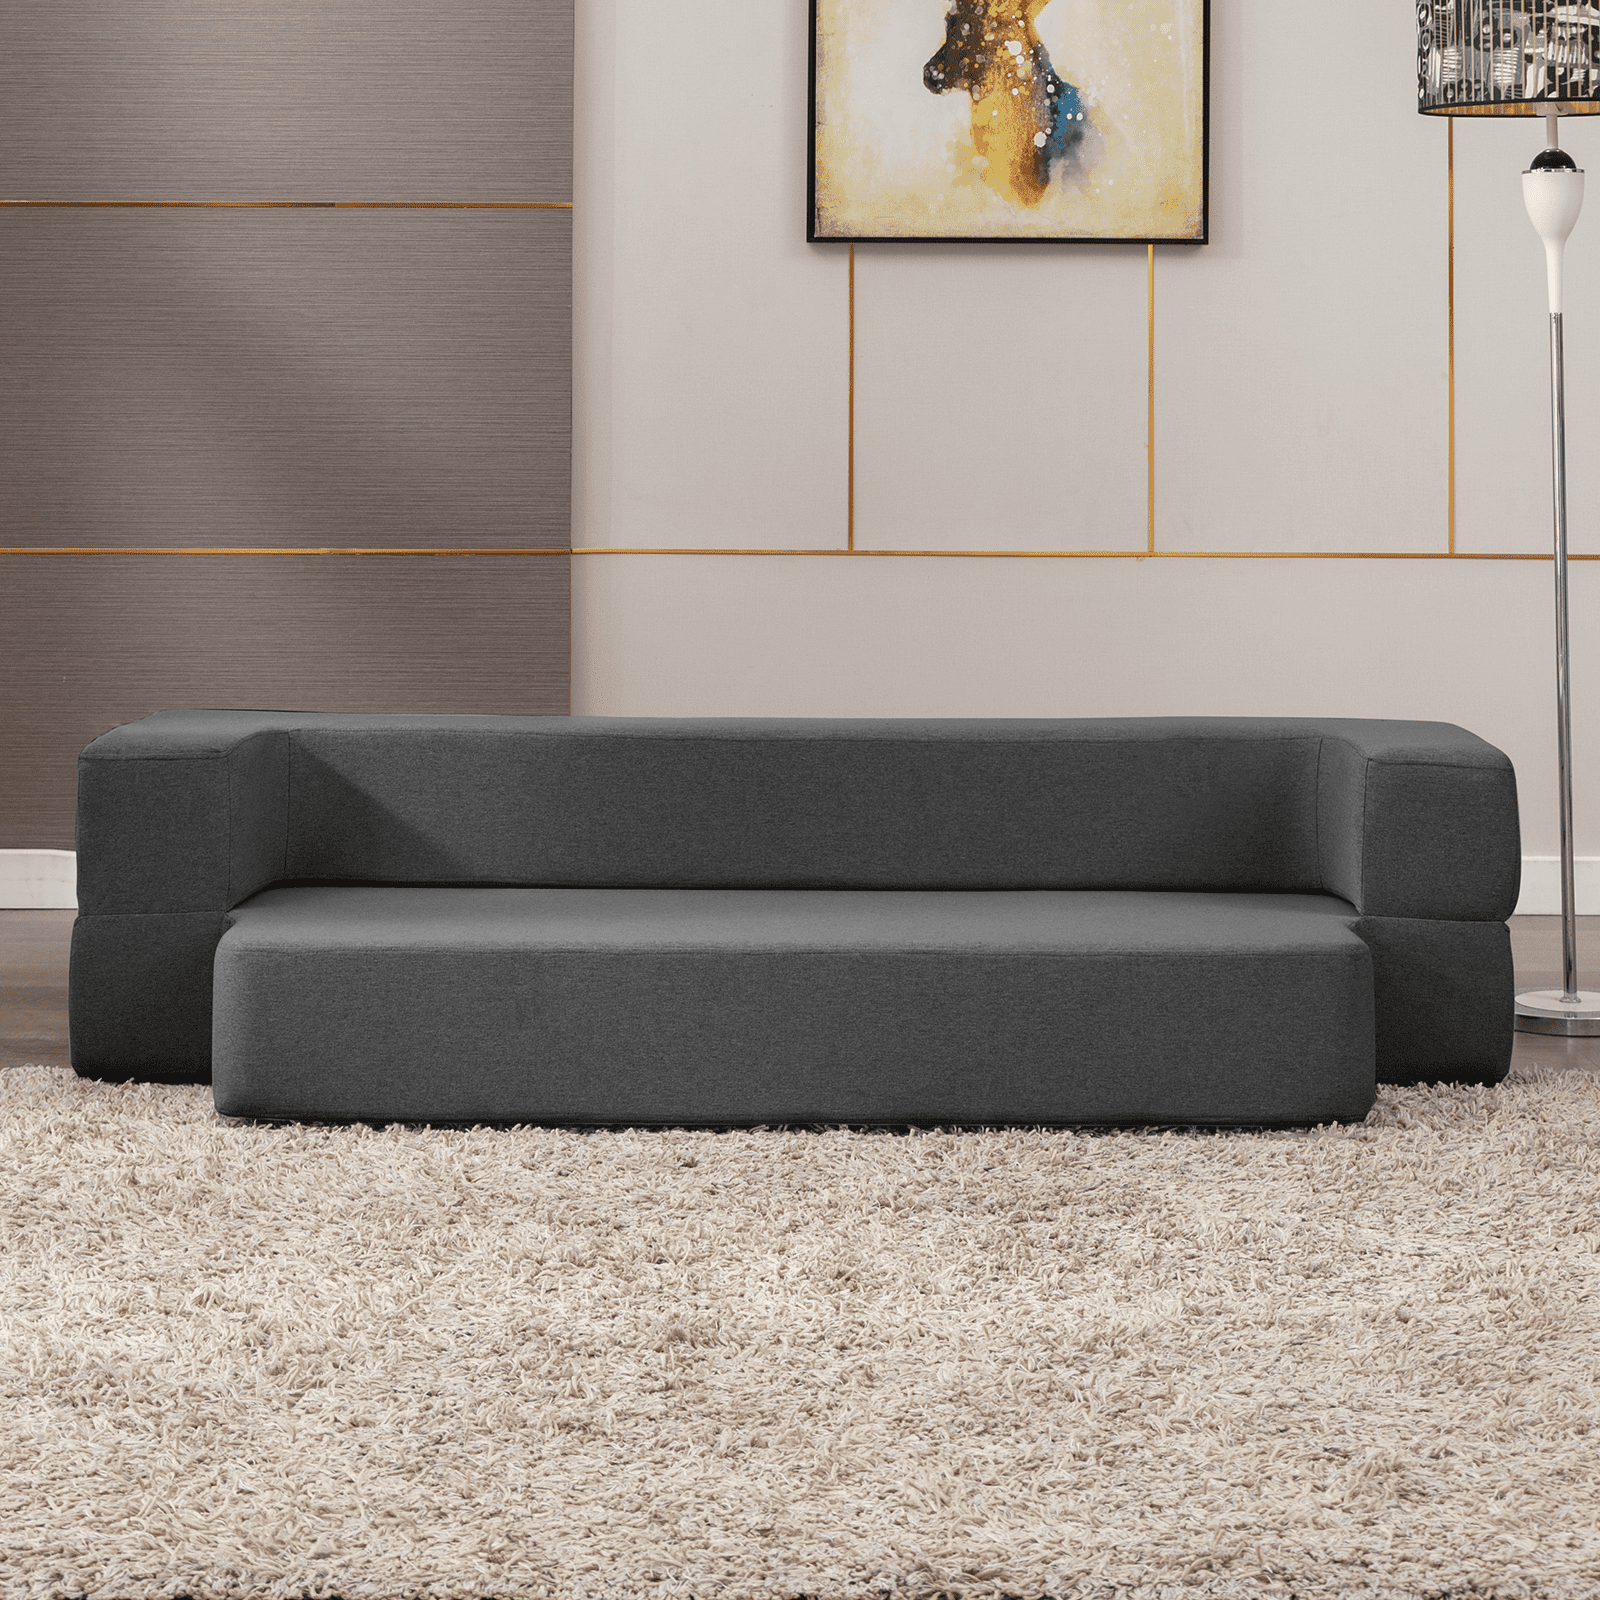 HonTop 10 Inch Folding Sofa Bed with 2 Pillows Modern Futon Sofa Bed Memory  Foam Couch Sleeper Chair Bed for Guest Bed Mattress, Twin Size, Grey Sofa